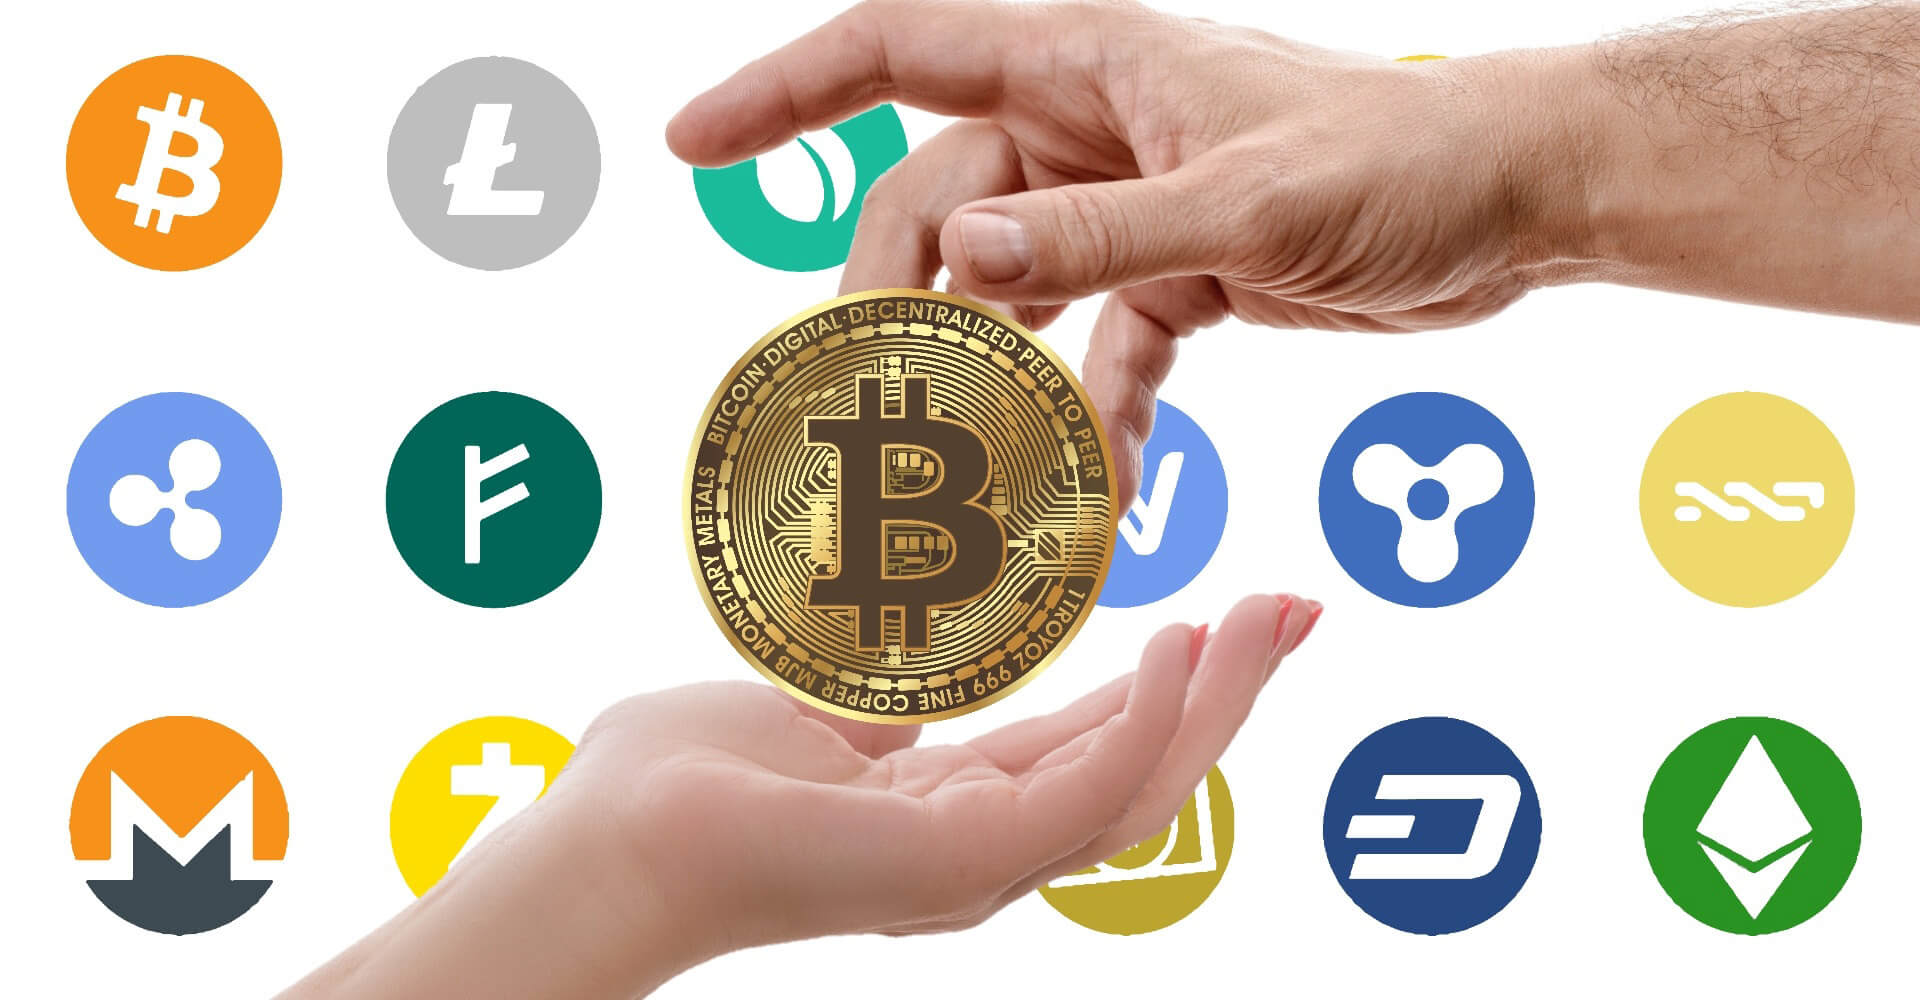 Hand receiving bitcoin from another hand